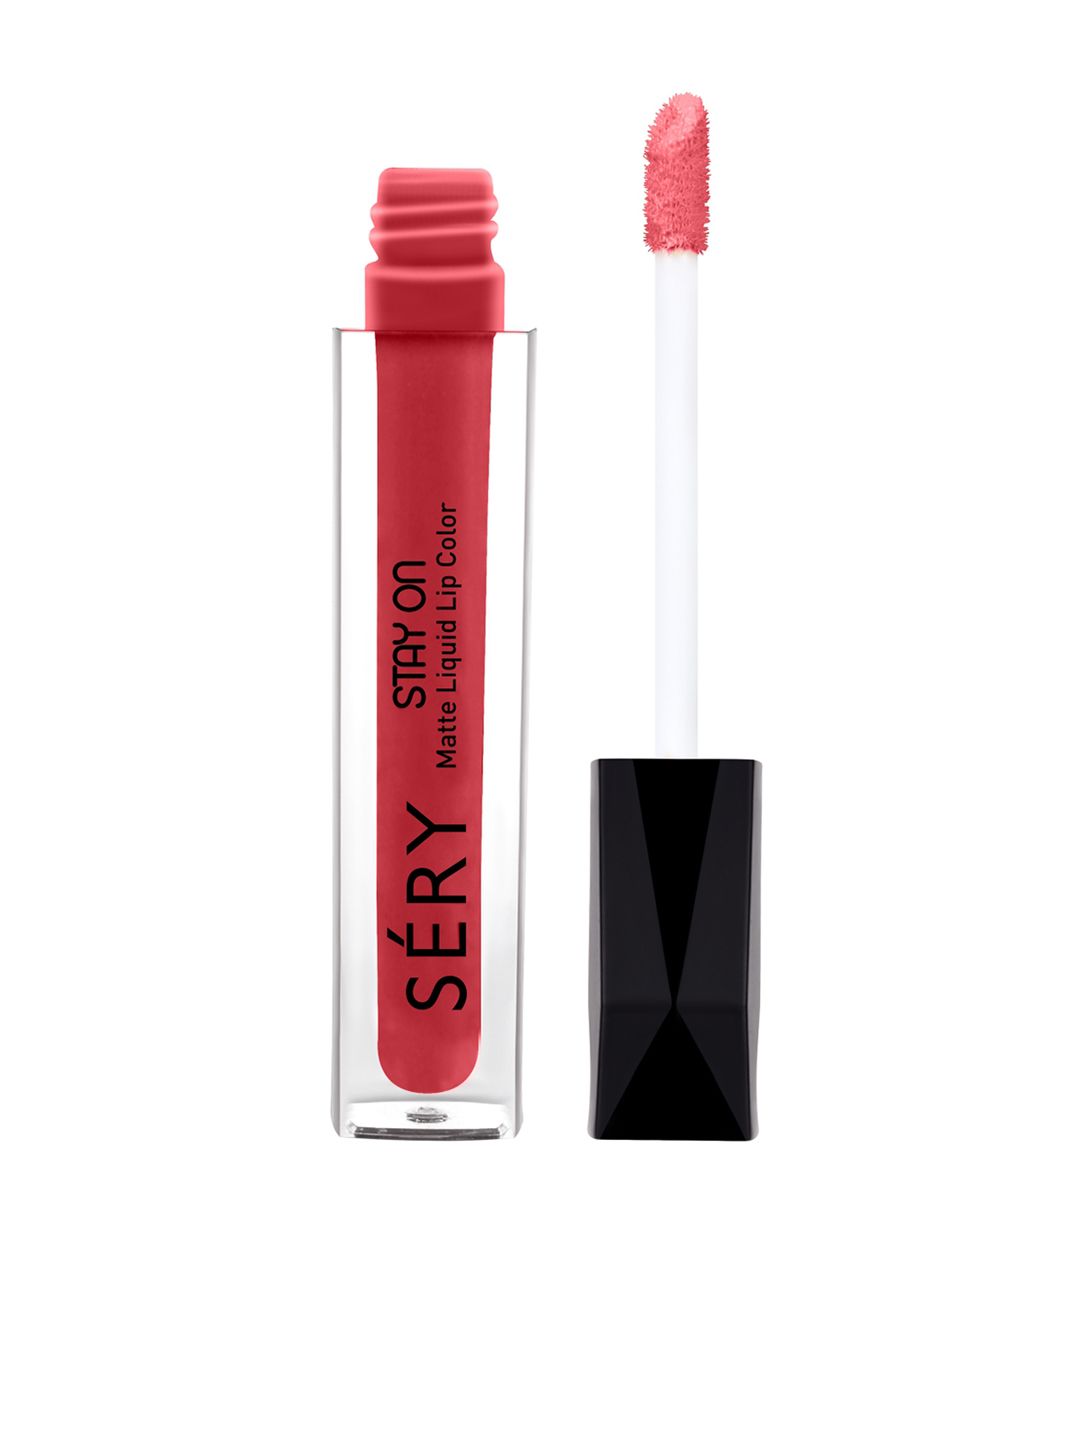 SERY Stay On Liquid Matte Lip Color-Cabana Sunset LSO-01 Price in India